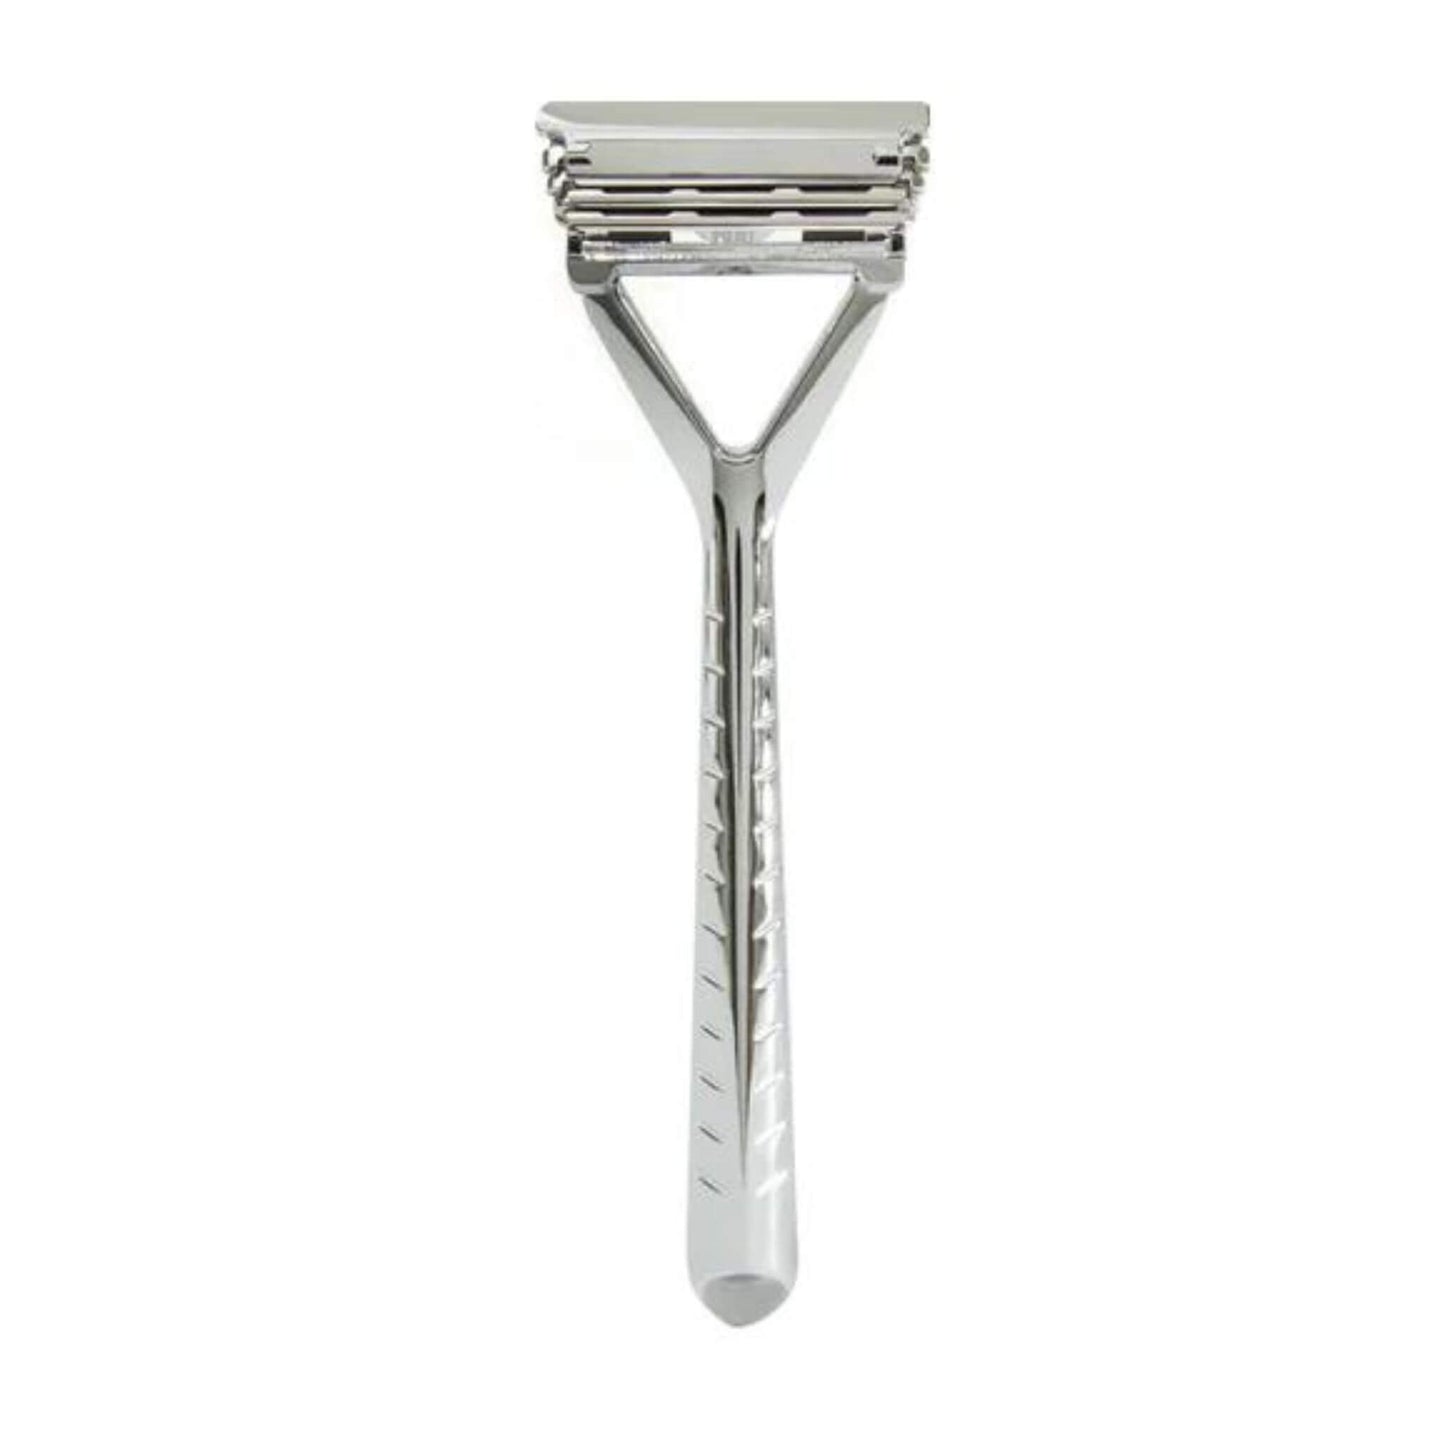 The Leaf pivoting head sustainable razor. chrome finish. Each razor comes with a 10 pack of blades 